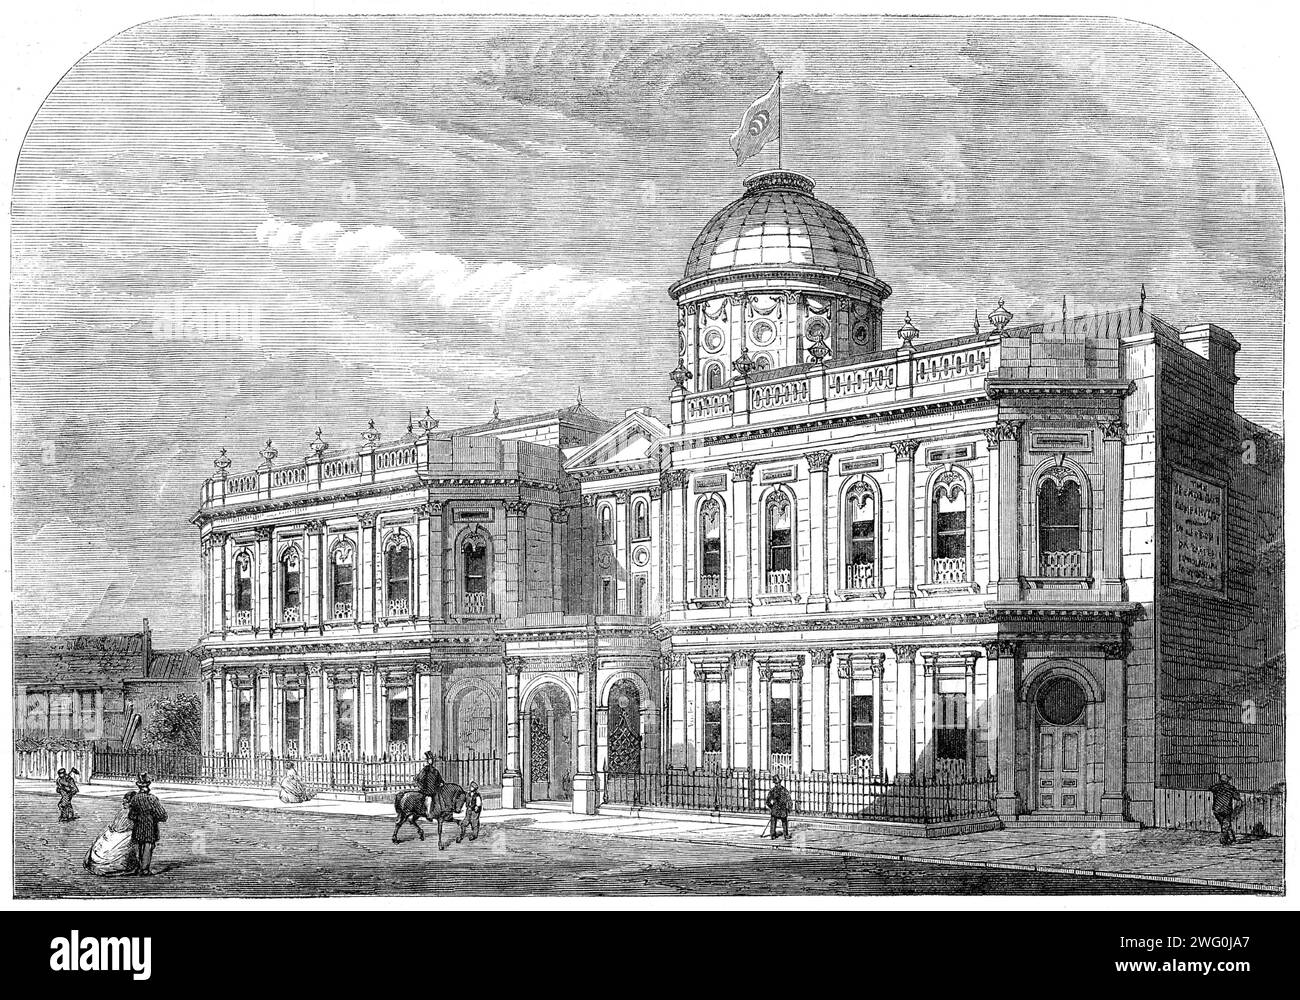 The Oriental Baths, Victoria-Street, Westminster, 1862. View of '...the handsome and extensive building...for the purpose of extending to England the benefits of that great sanitary institution, the Turkish Bath...The ceilings of [the hotrooms] are at once lighted and decorated by means of stained-glass stars of different sizes, in primitive colours. The ornamental stucco and terra-cotta work in these apartments is very elaborate and effective; the centre screens, diaper-walls, and arches leading to the fountain or douching rooms are all finished in terra-cotta...The lavatories are elegantly o Stock Photo